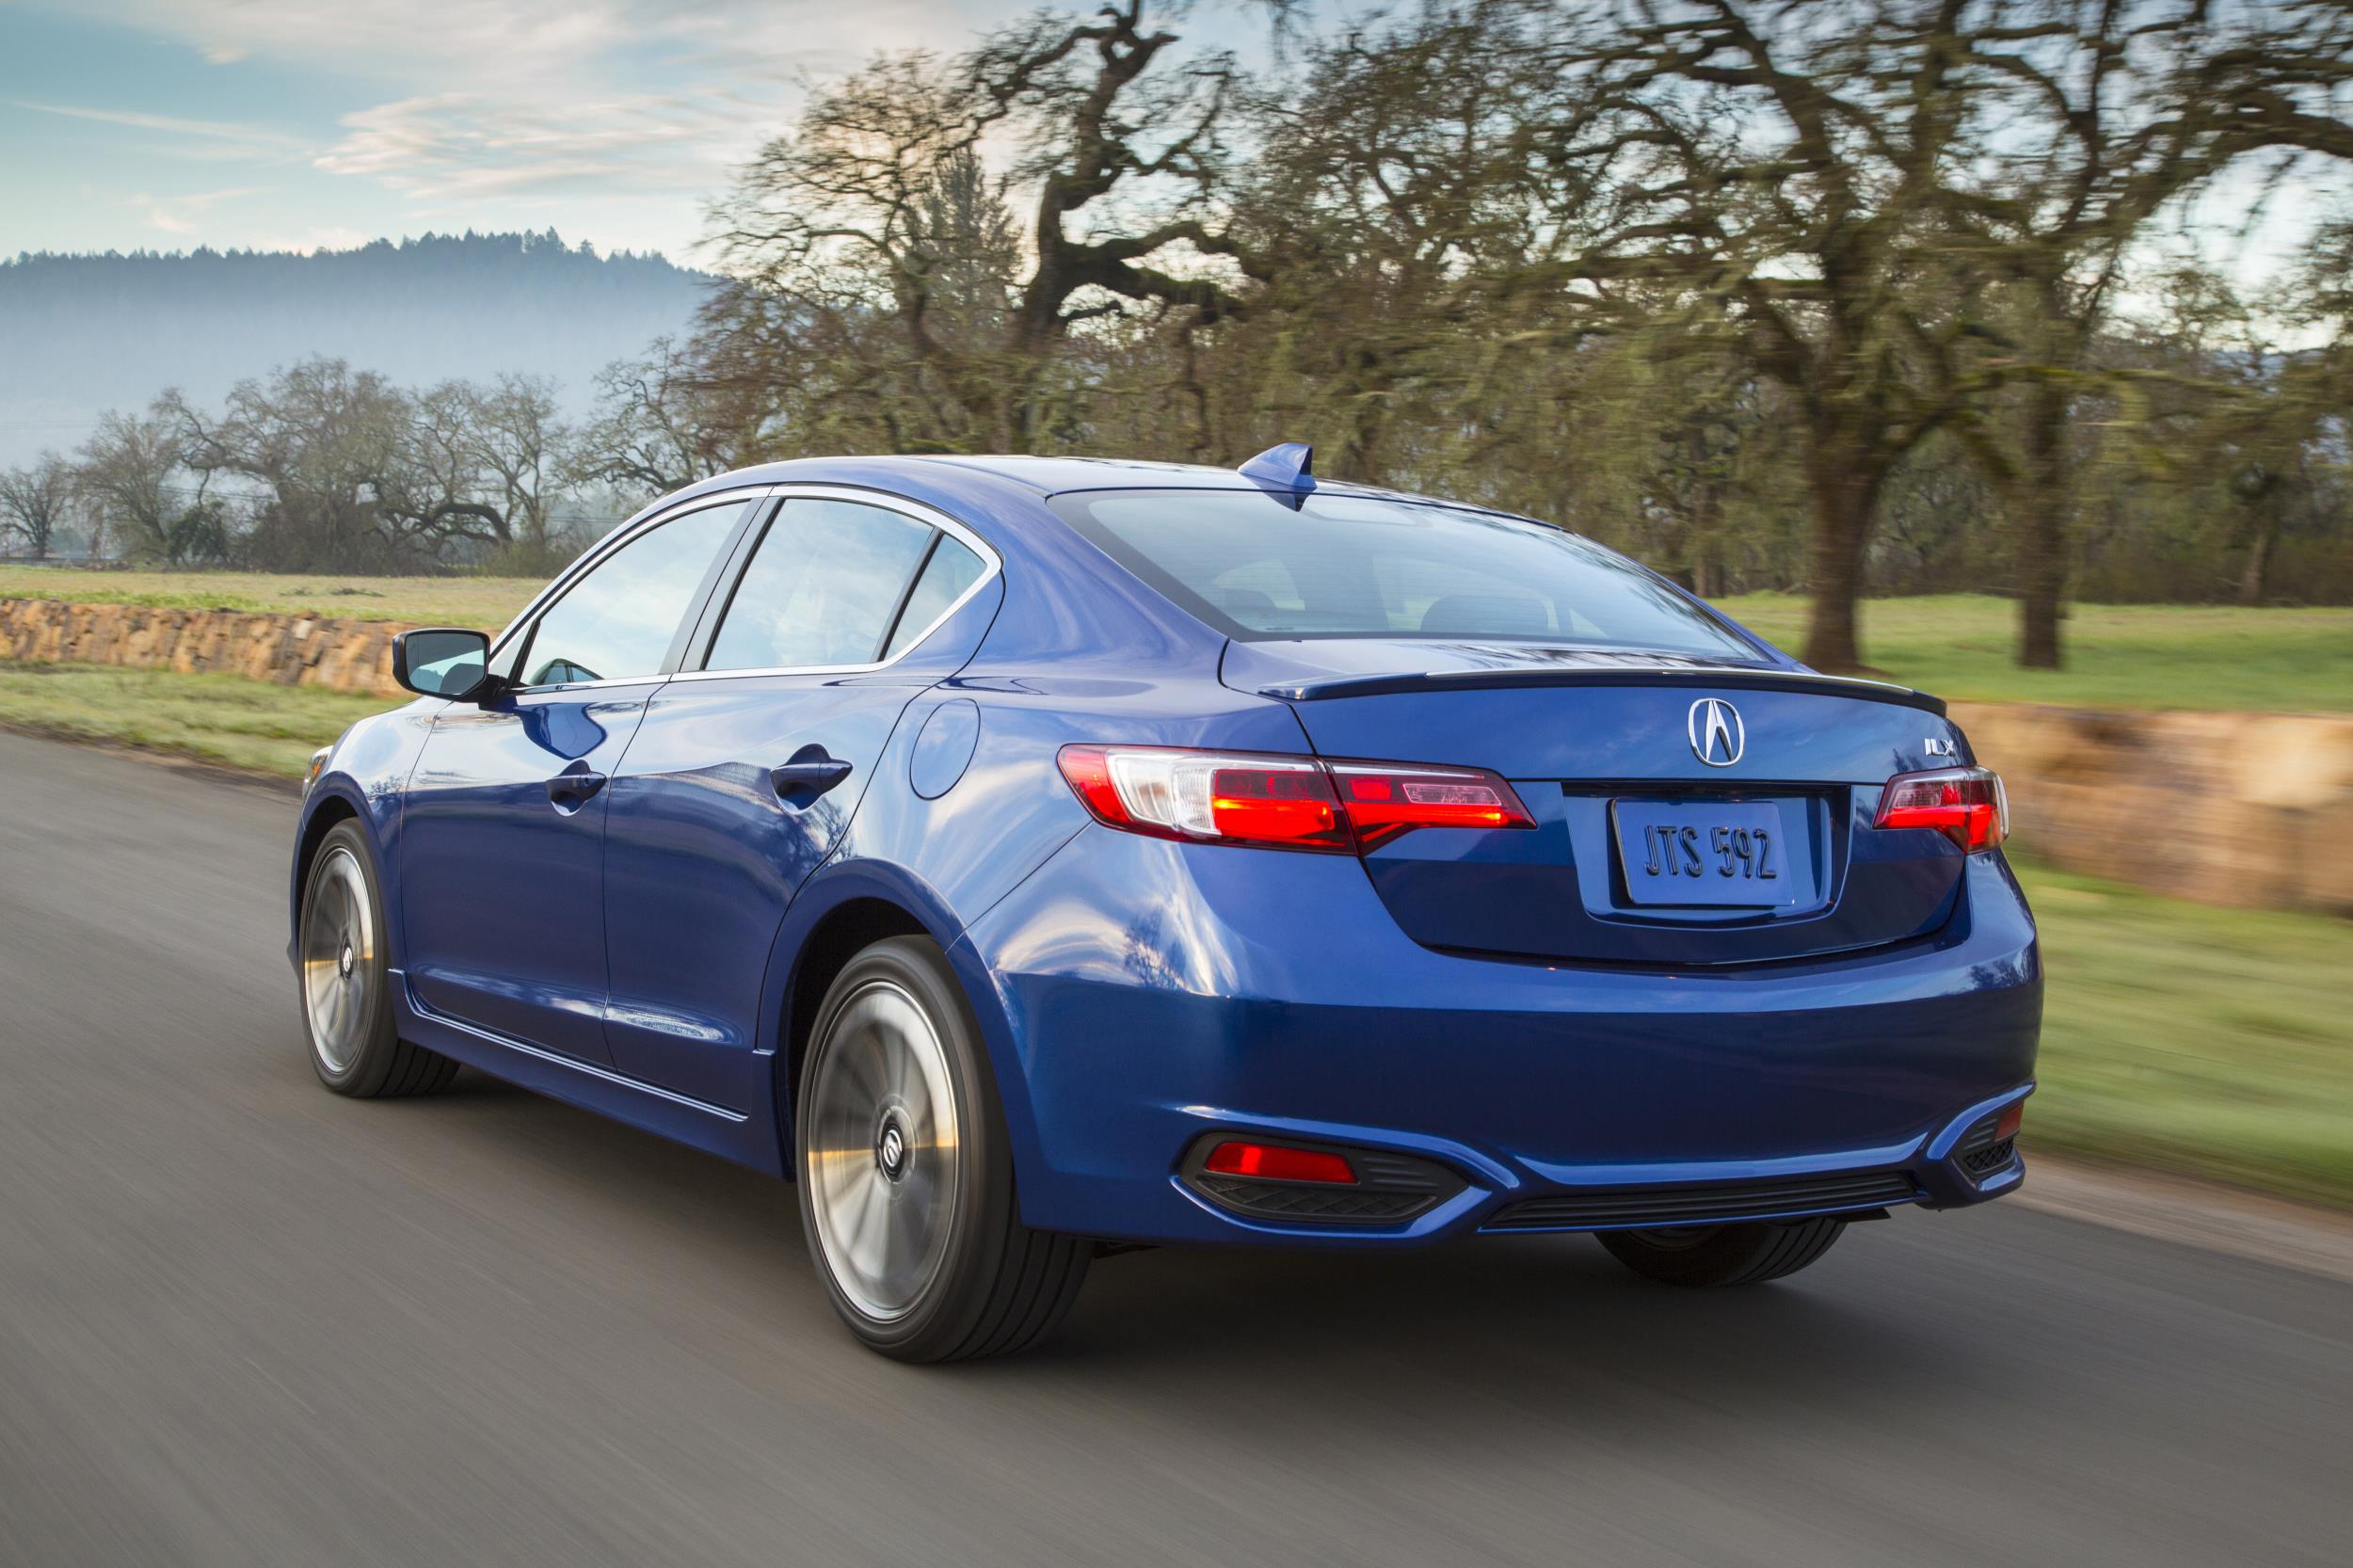 2017 Acura ILX Introduced, Costs $90 More than 2016 Model ...